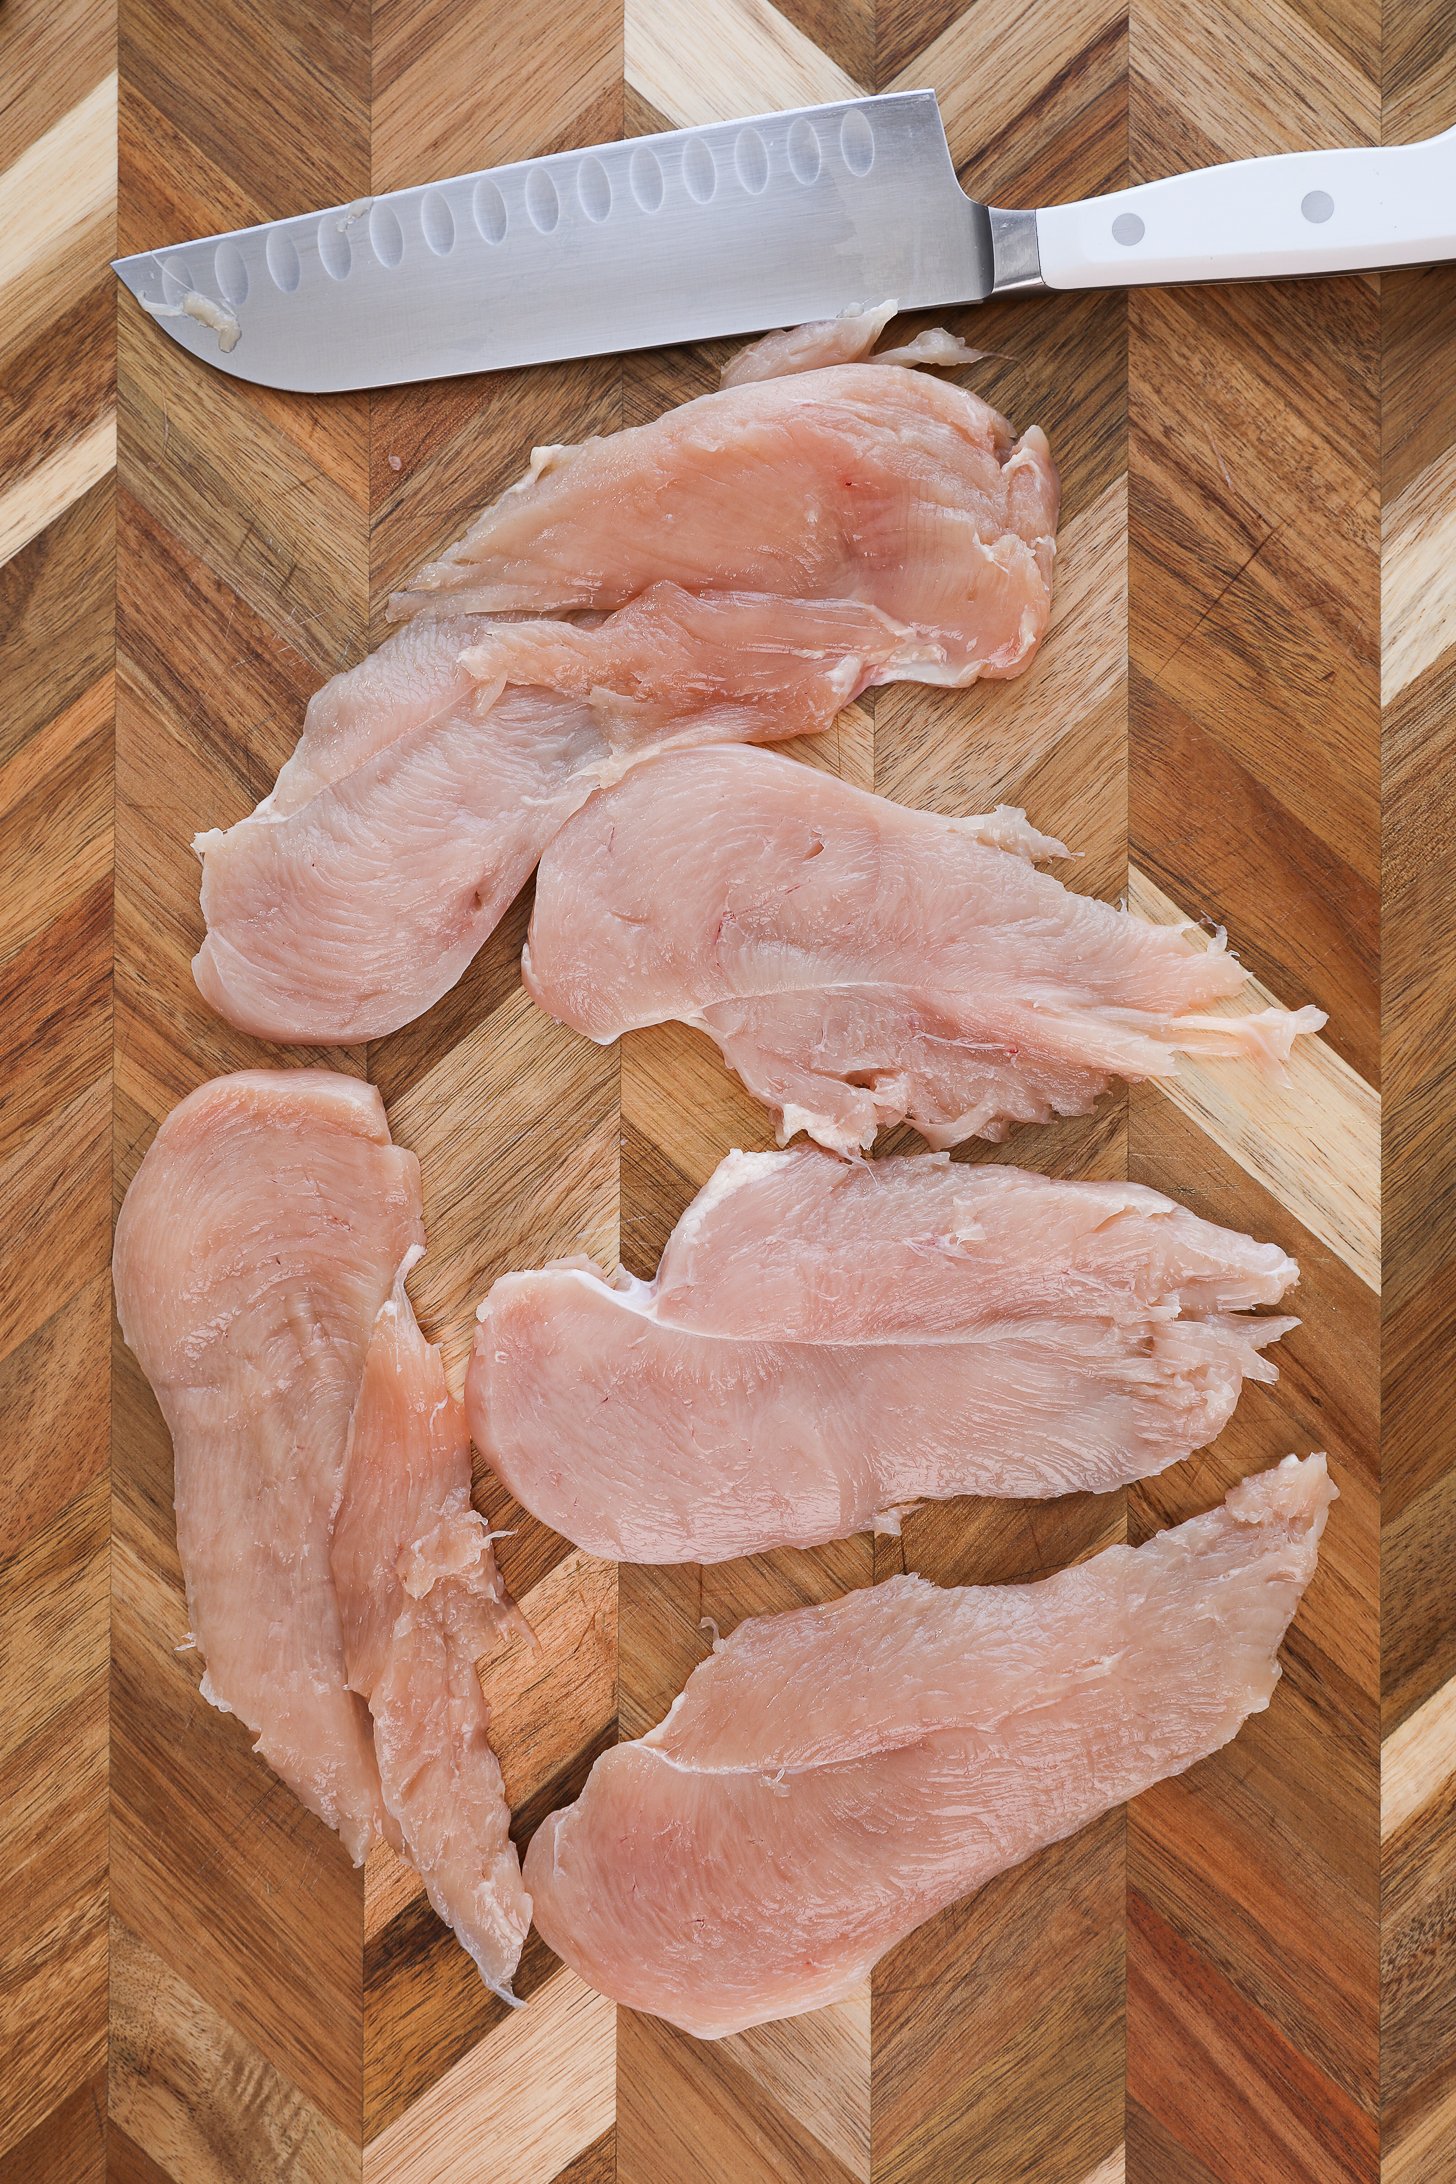 Thinly sliced chicken breasts laid on a wooden chopping board with a knife nearby.